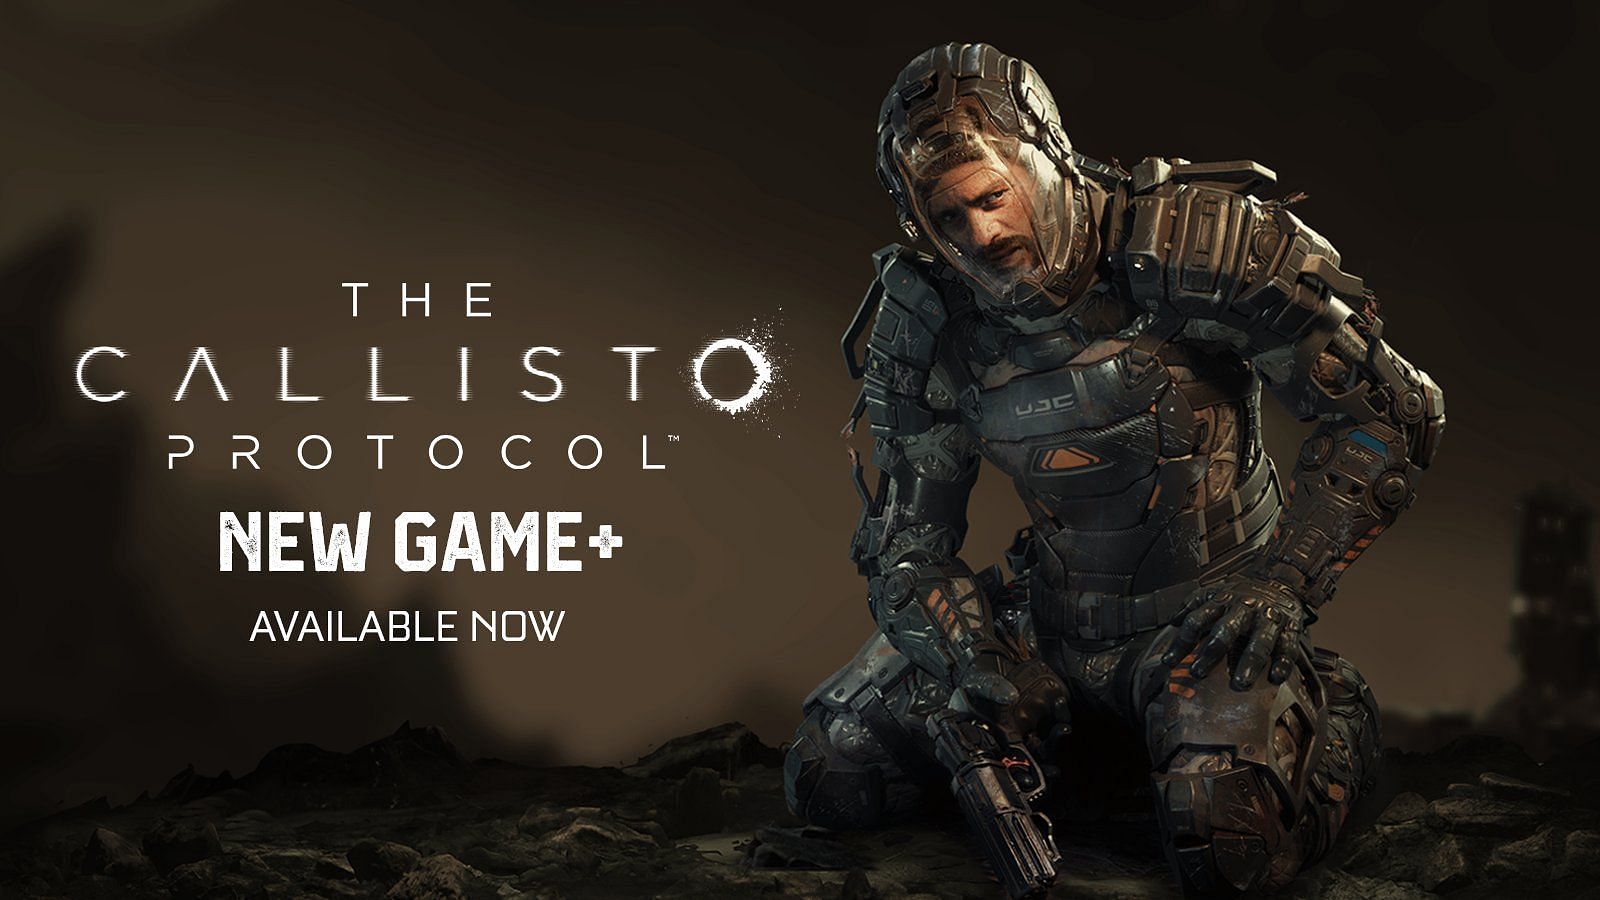 The Callisto Protocol 3.01 Update Adds New Game Plus and Fixes 'The Protocol  is About Life' Achievement